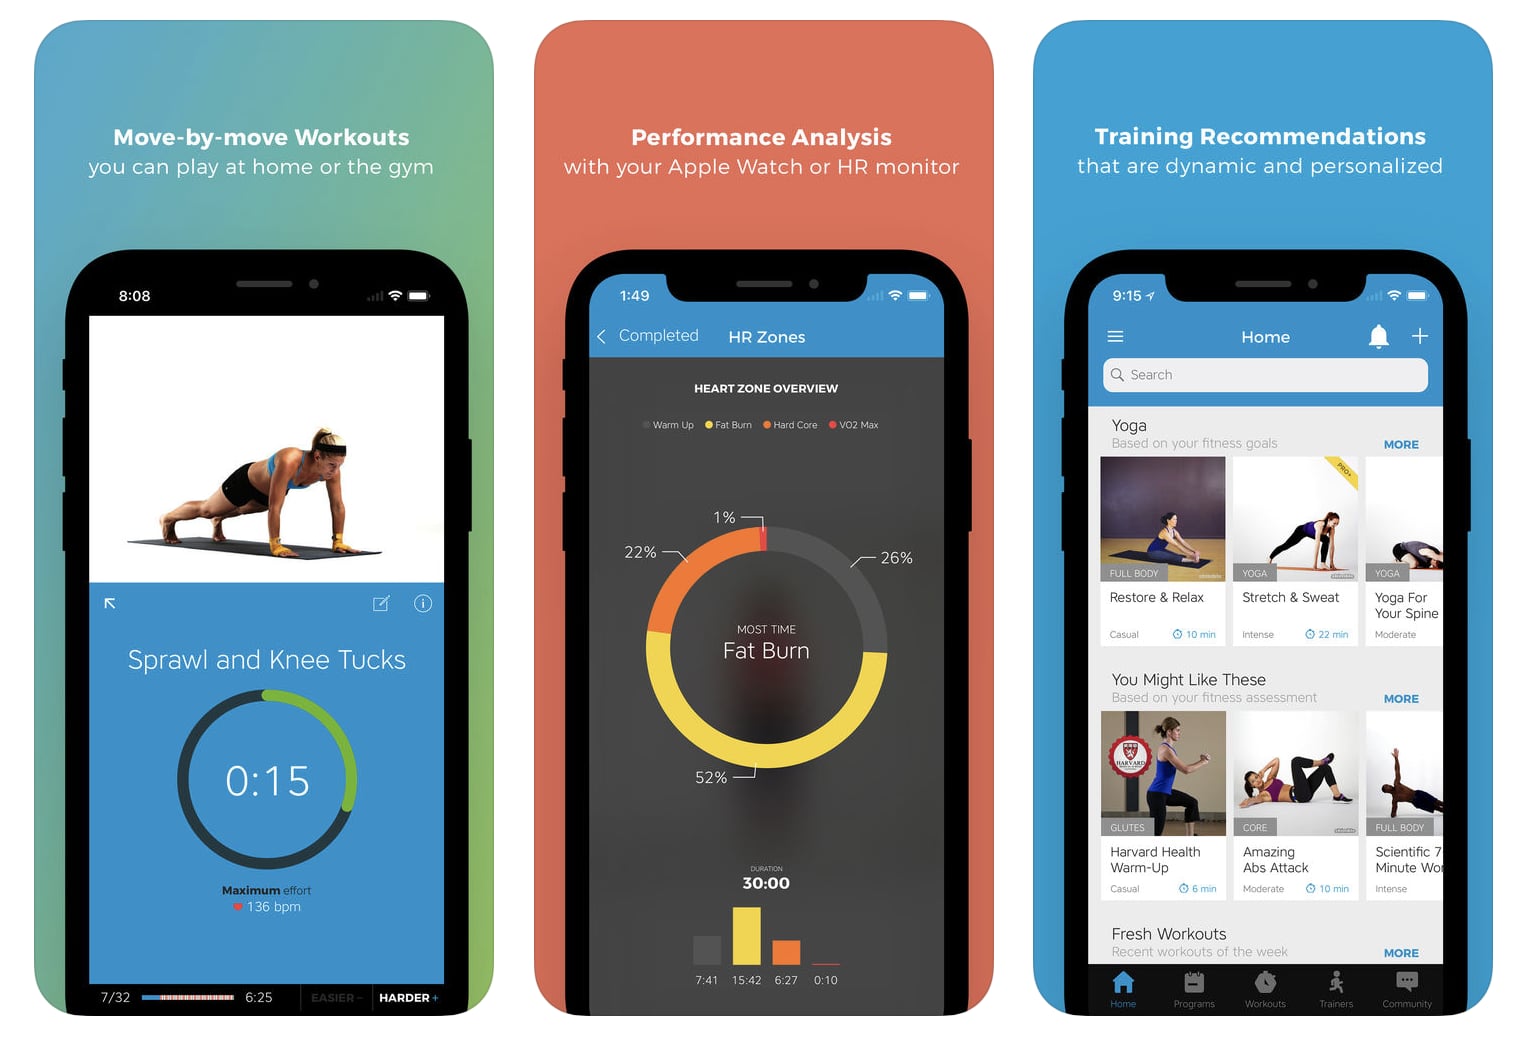 Best Gym Workout Apps For Beginners - BEST HOME DESIGN IDEAS